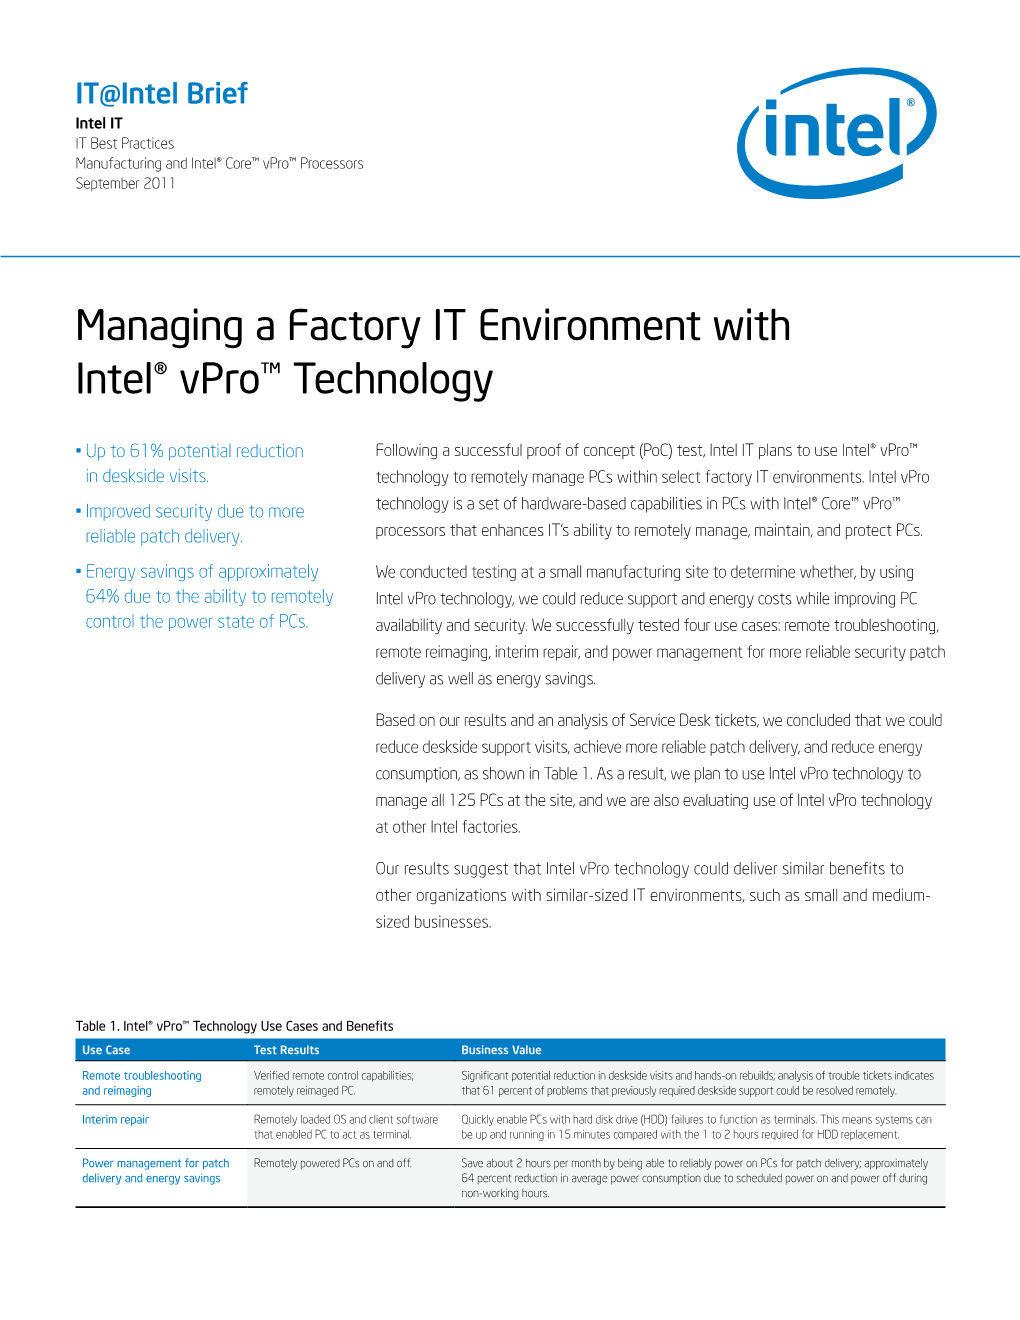 Managing a Factory IT Environment with Intel® Vpro™ Technology